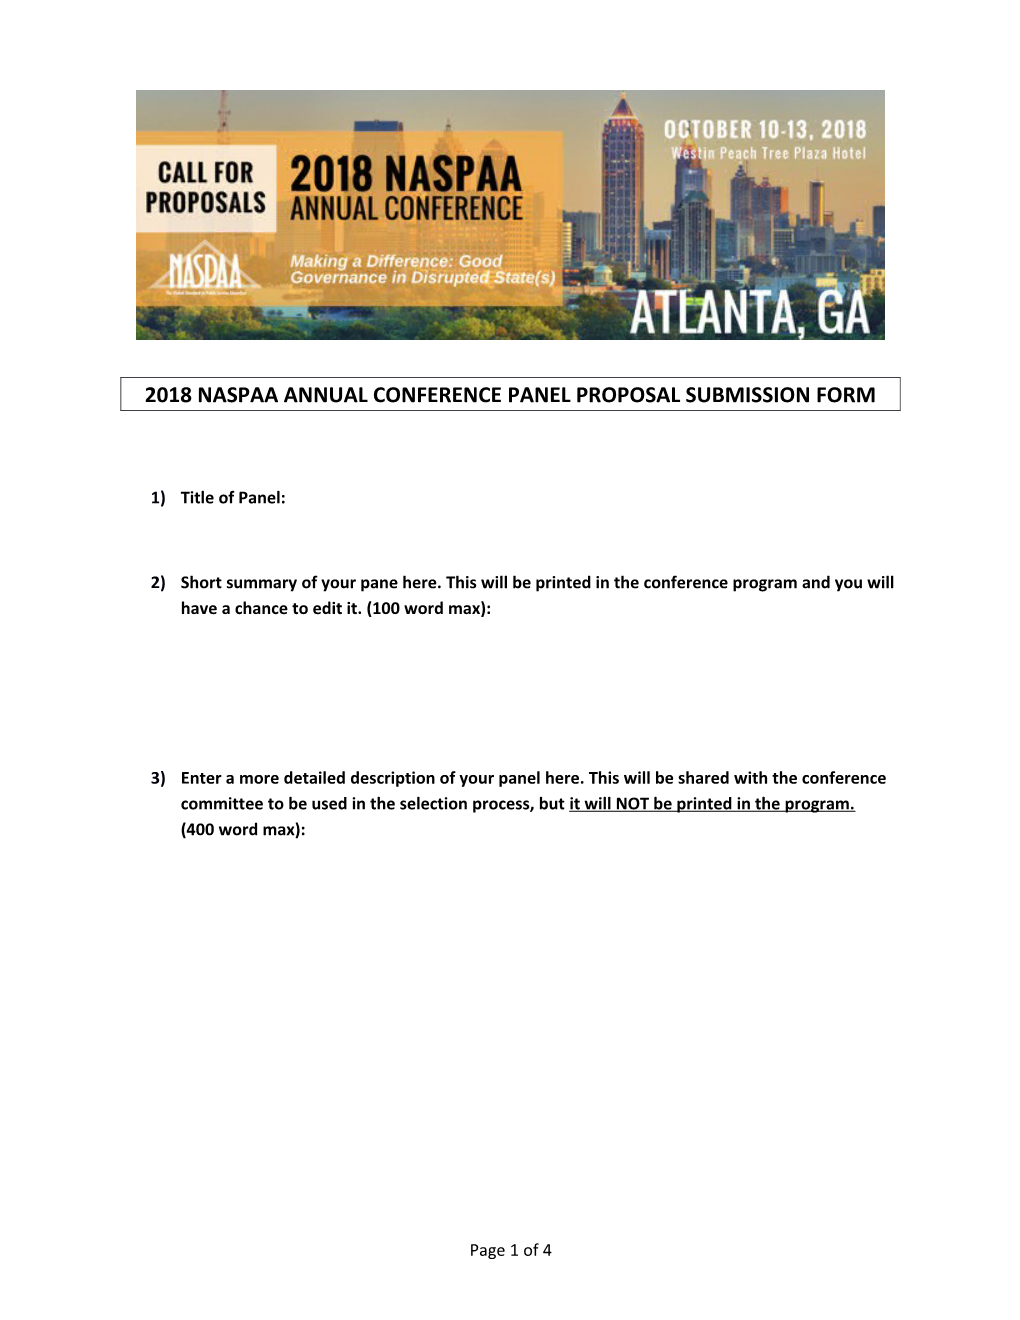 2018 Naspaa Annual Conference Panel Proposal Submission Form